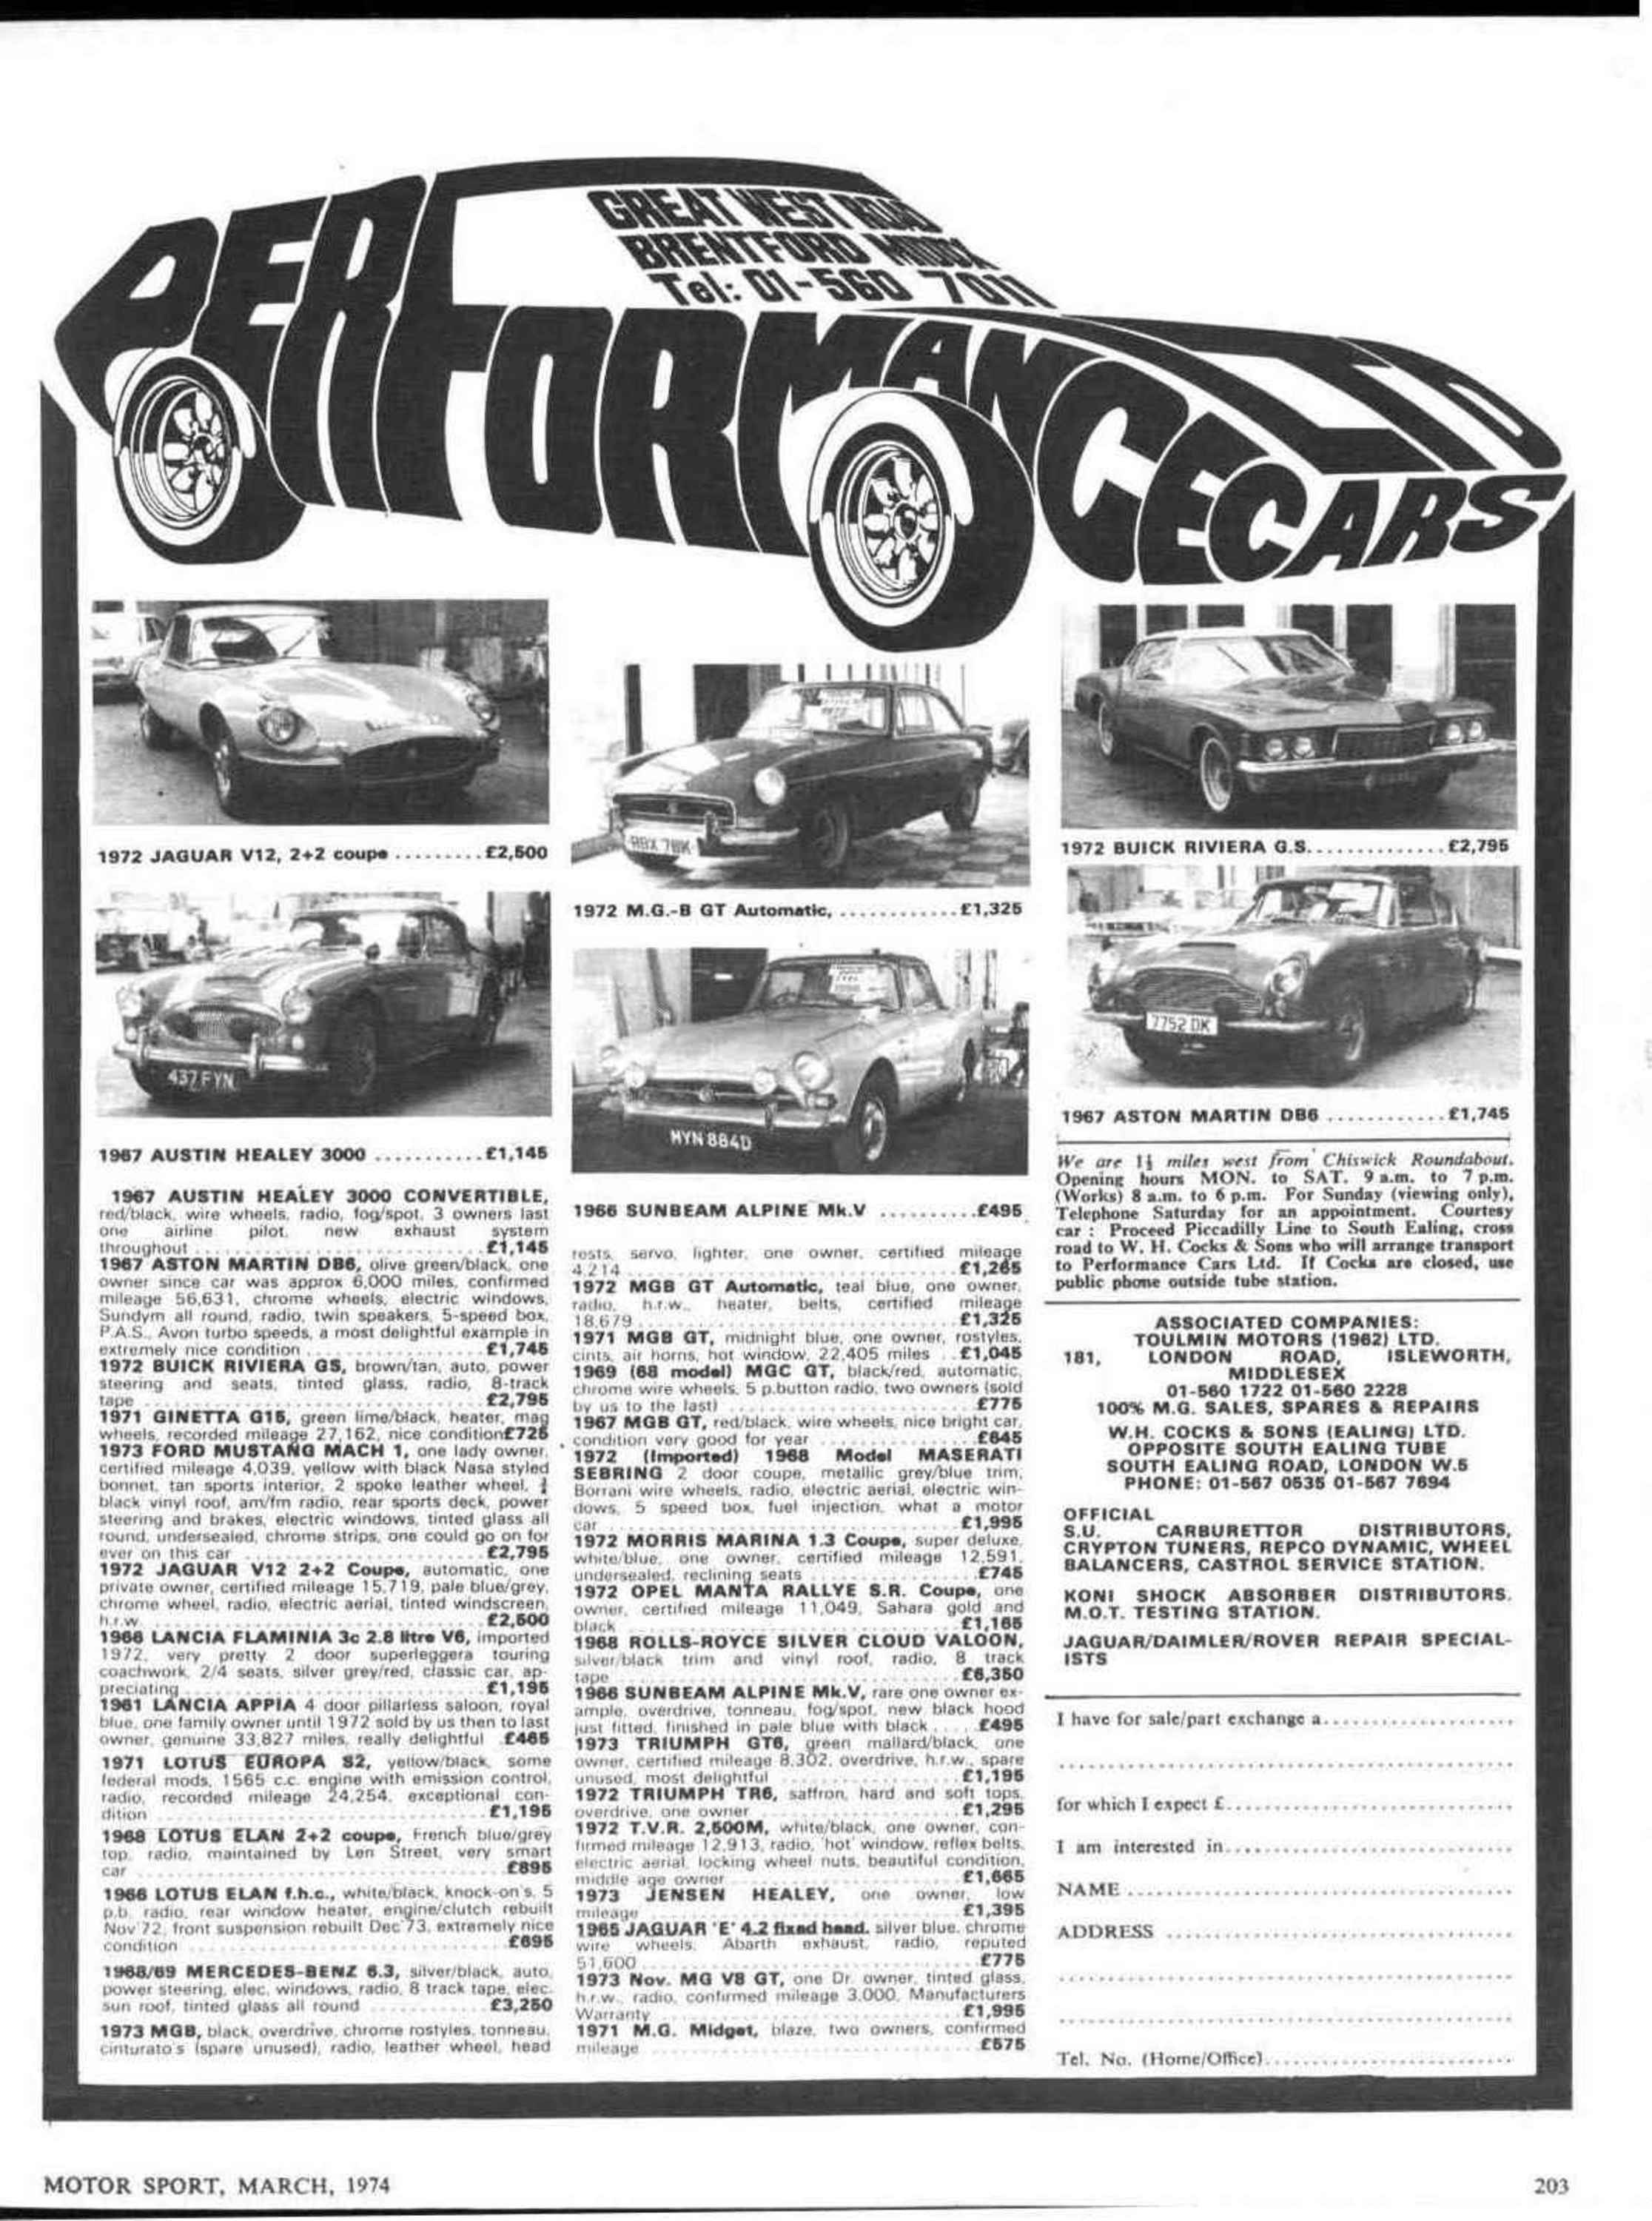 The Arctic Rally March 1974 - Motor Sport Magazine